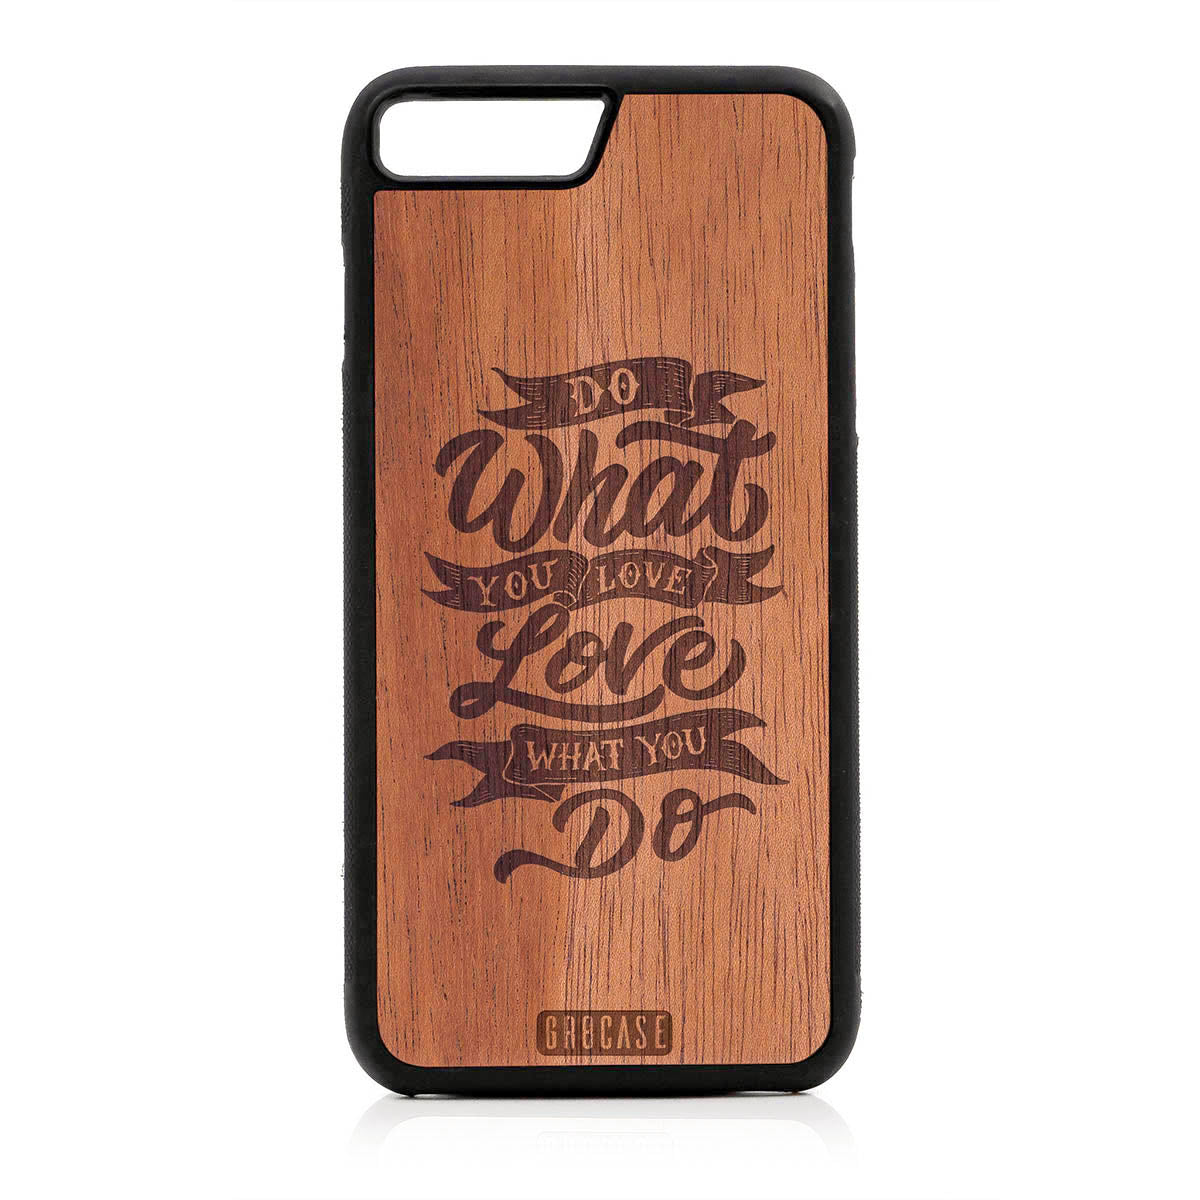 Do What You Love Love What You Do Design Wood Case For iPhone 7 Plus / 8 Plus by GR8CASE